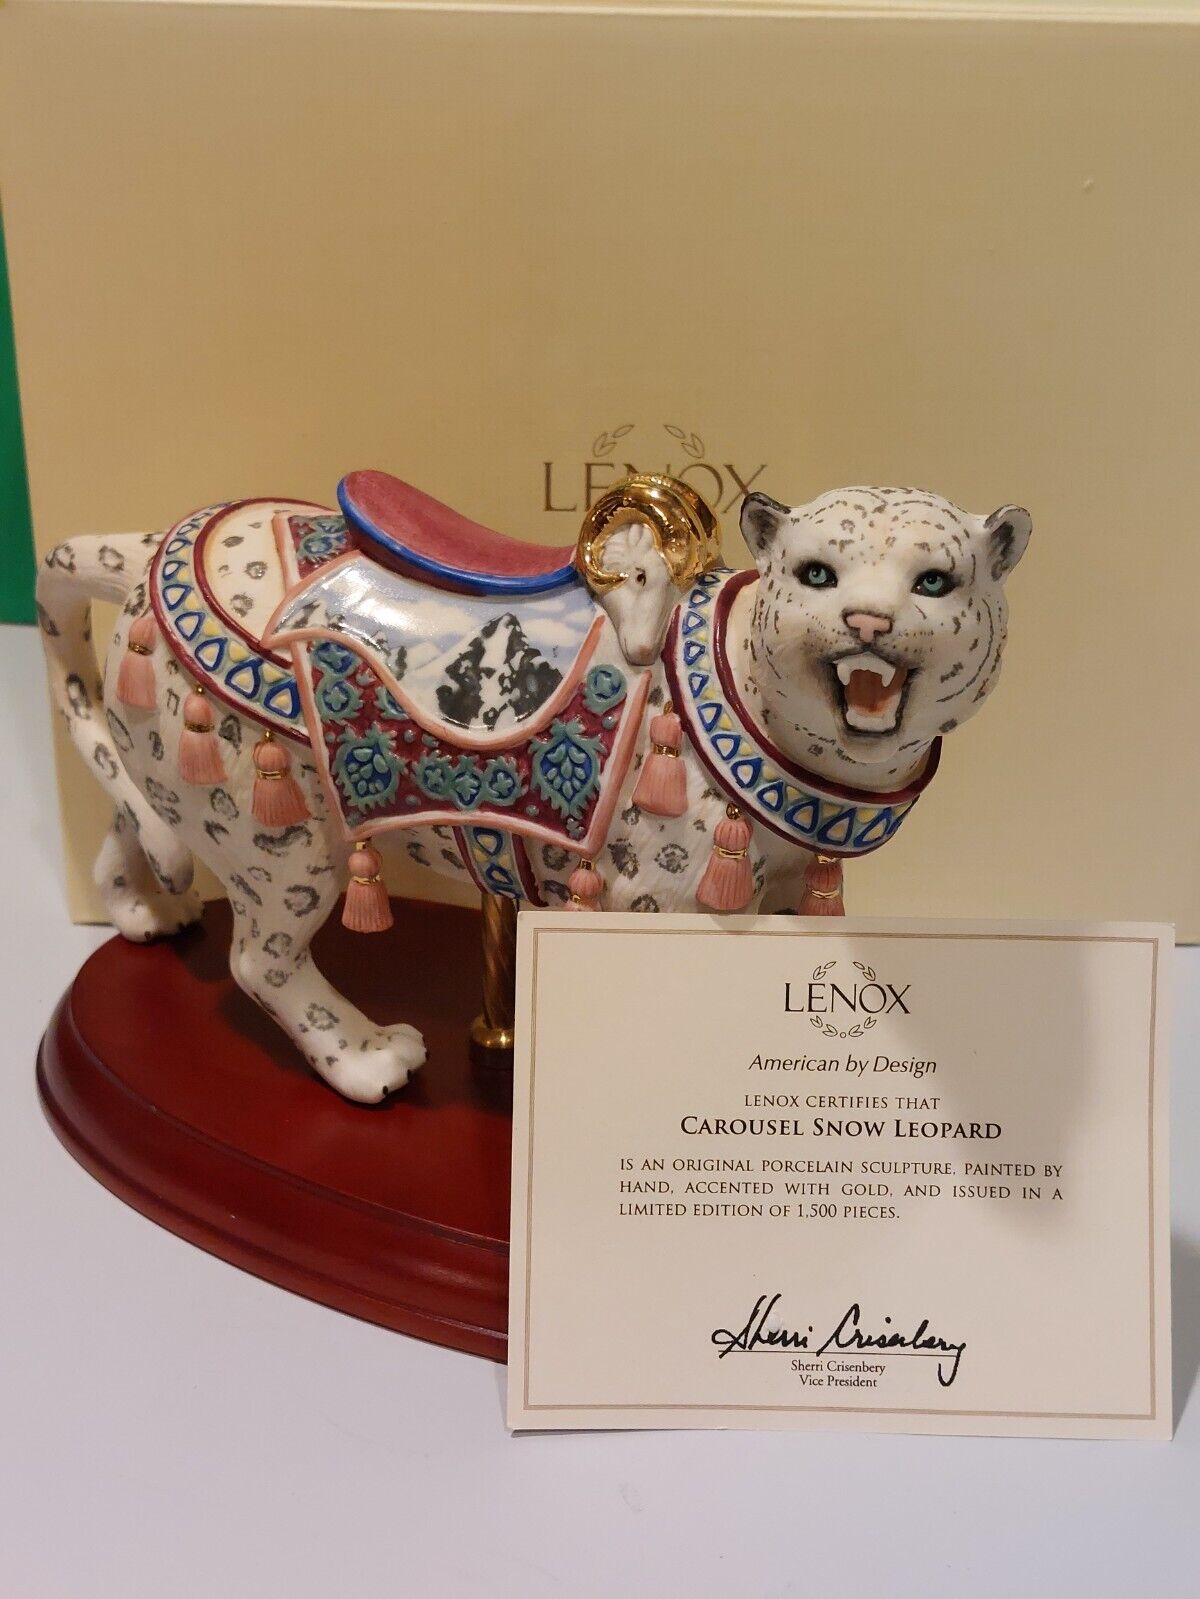 LENOX 2008 SNOW LEOPARD CAROUSEL Limited Edition sculpture - NEW in BOX with COA